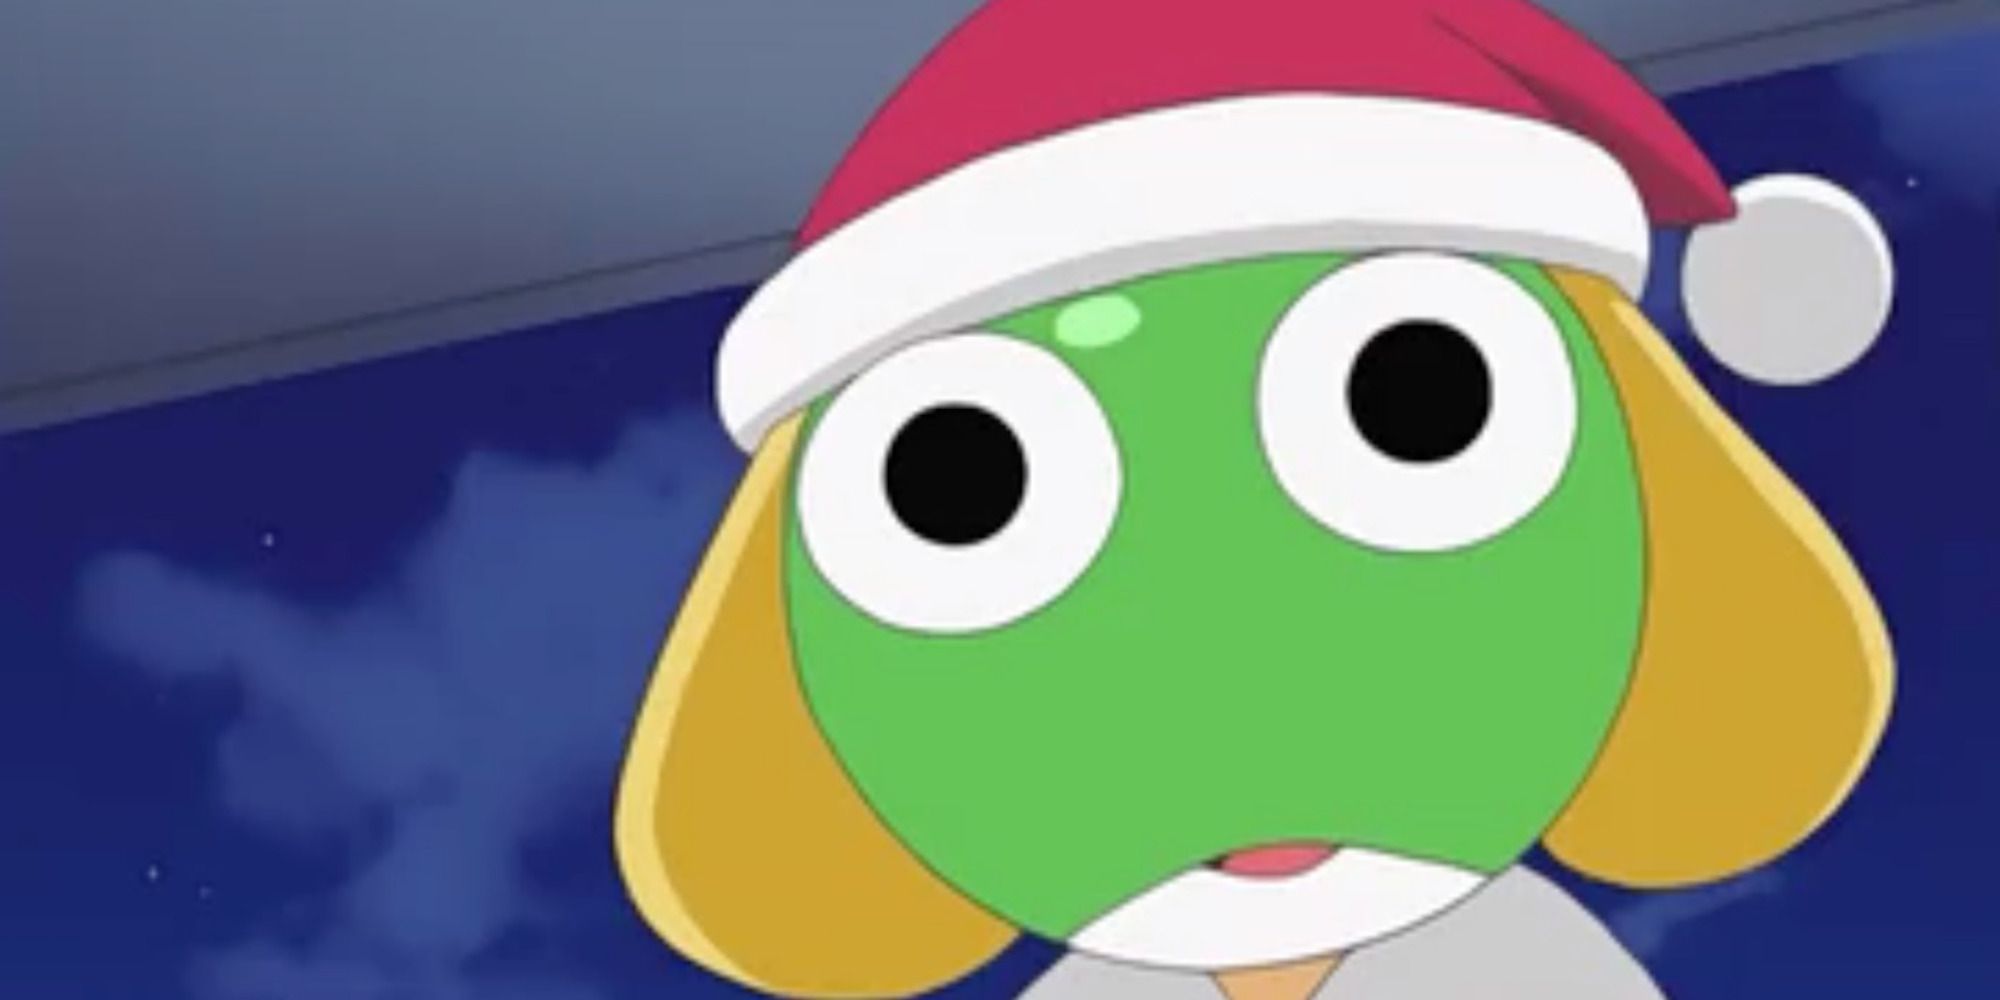 Sgt Frog from Sgt Frog